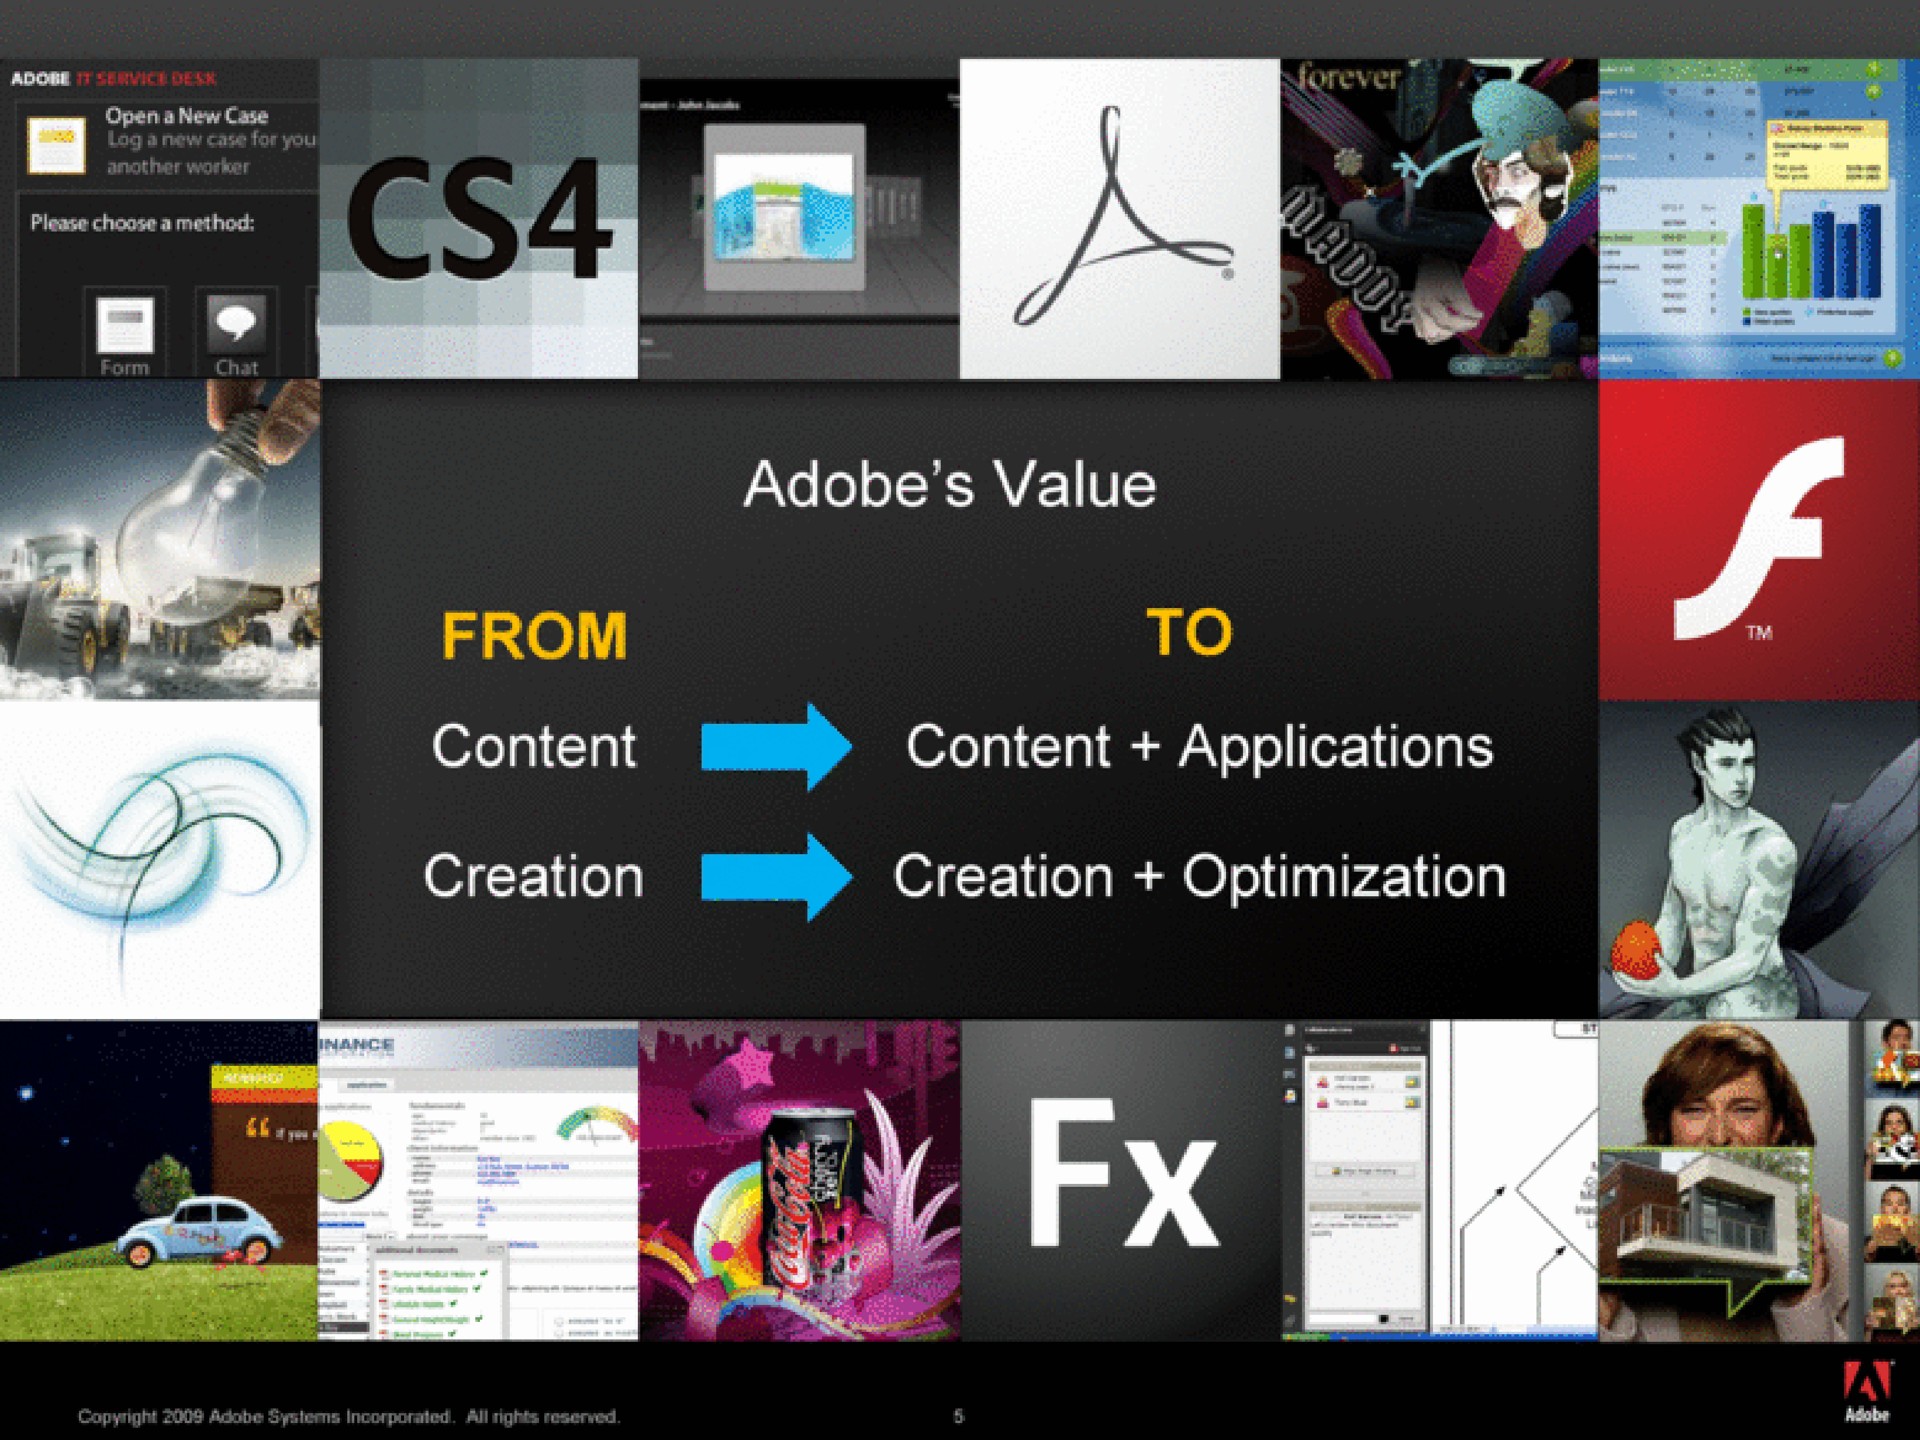 adobe value applications content creation optimization creation content from to | Adobe